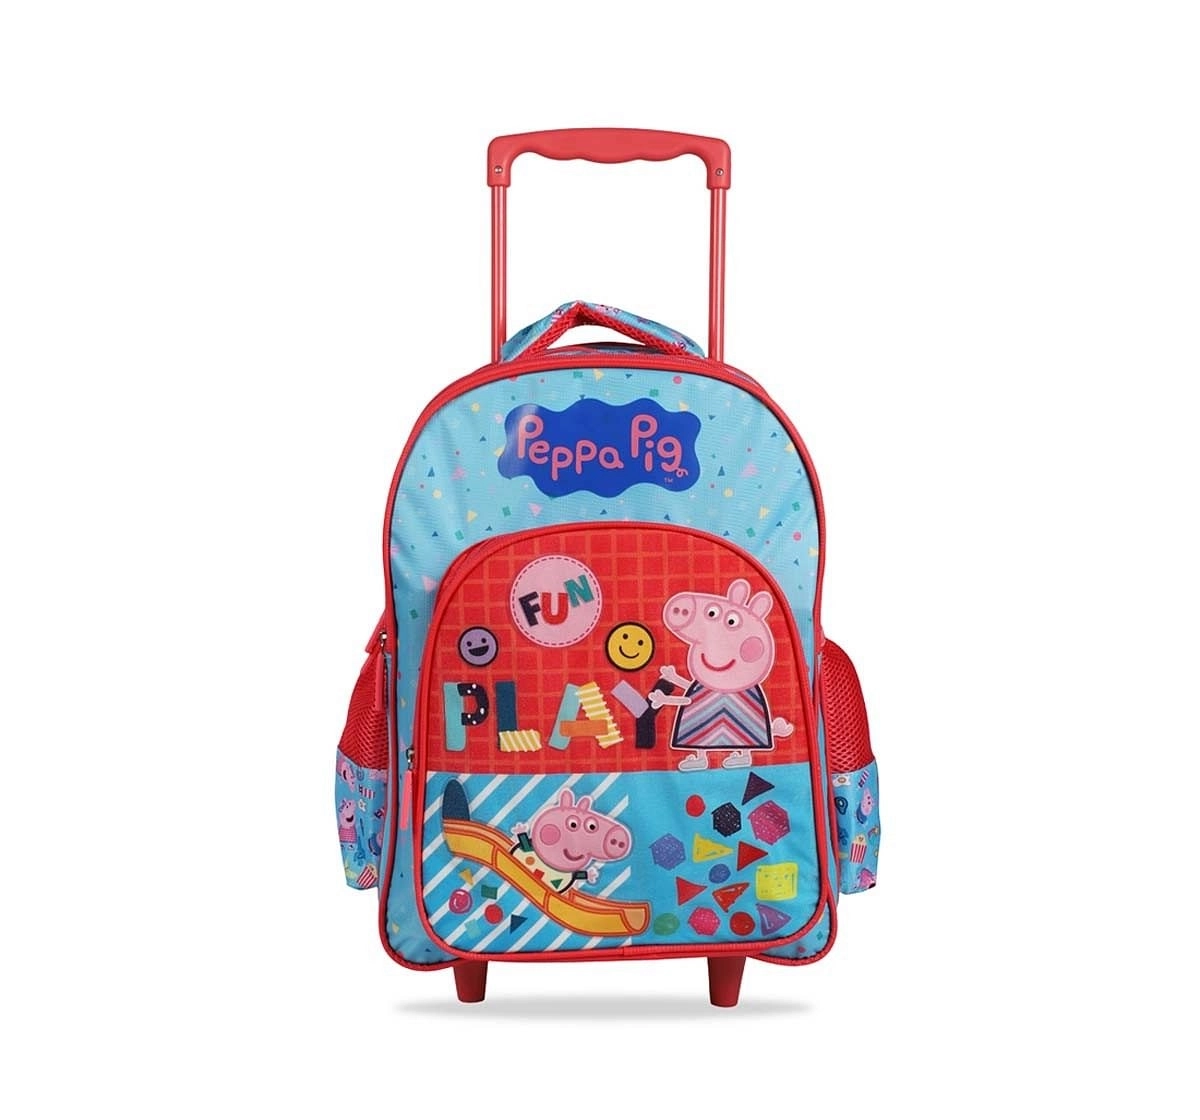 PEPPA Pig Backpack NeW Sparkly Pink and Blue Canvas Book Bag NWT Candy Cat  Suzy | eBay